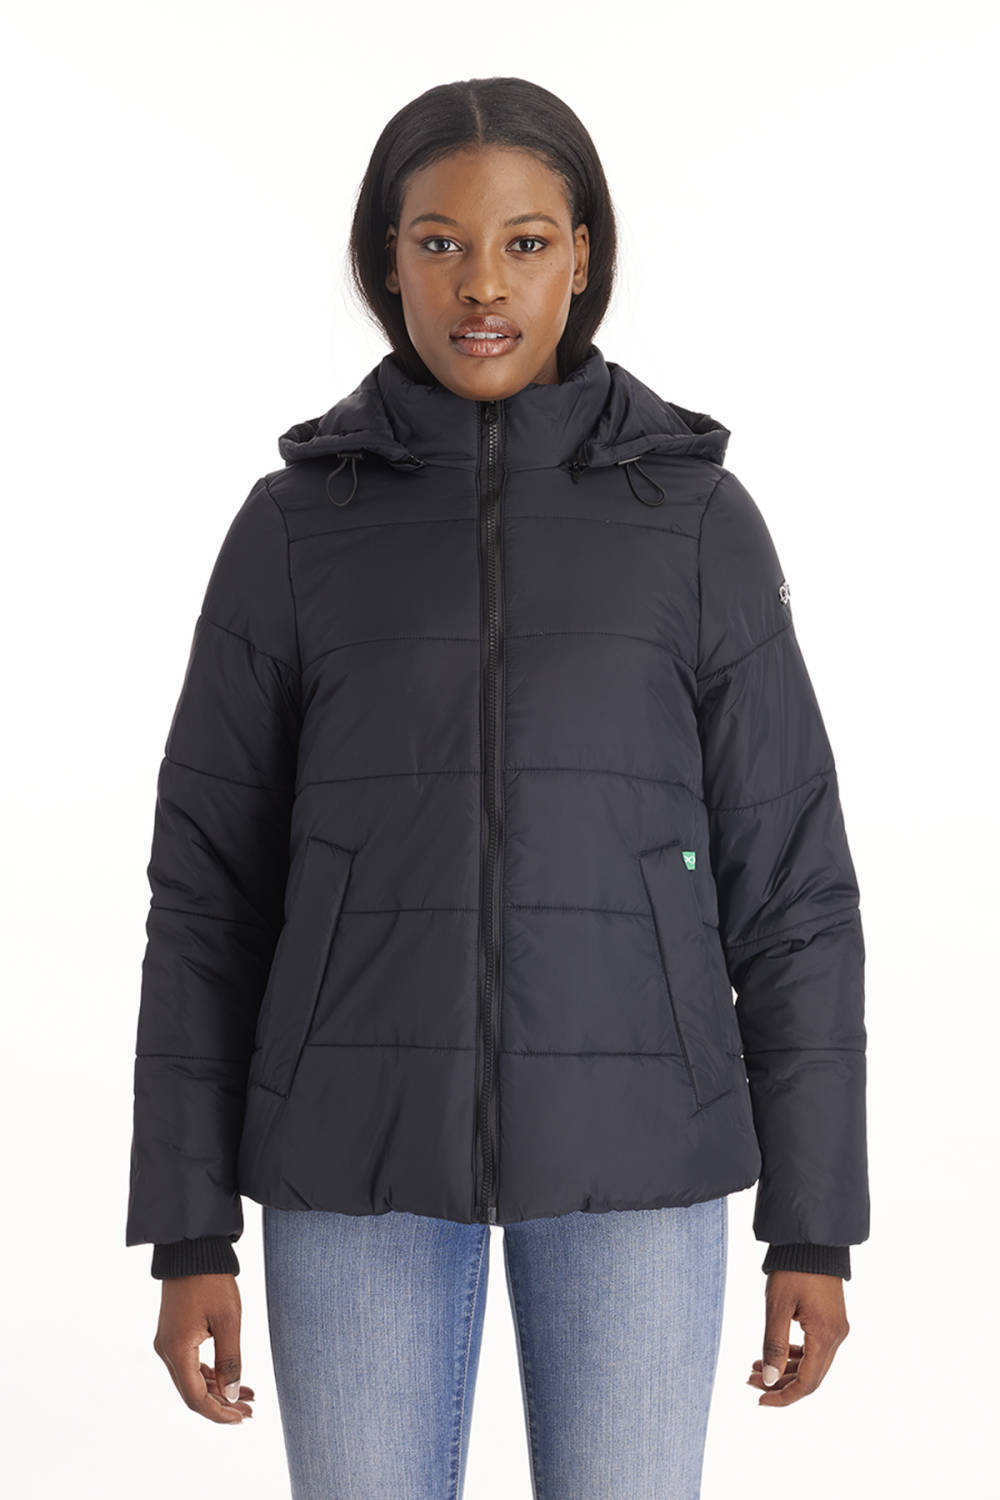 ESPRIT - MATERNITY 3-in-1 Padded Quilted Jacket at our online shop